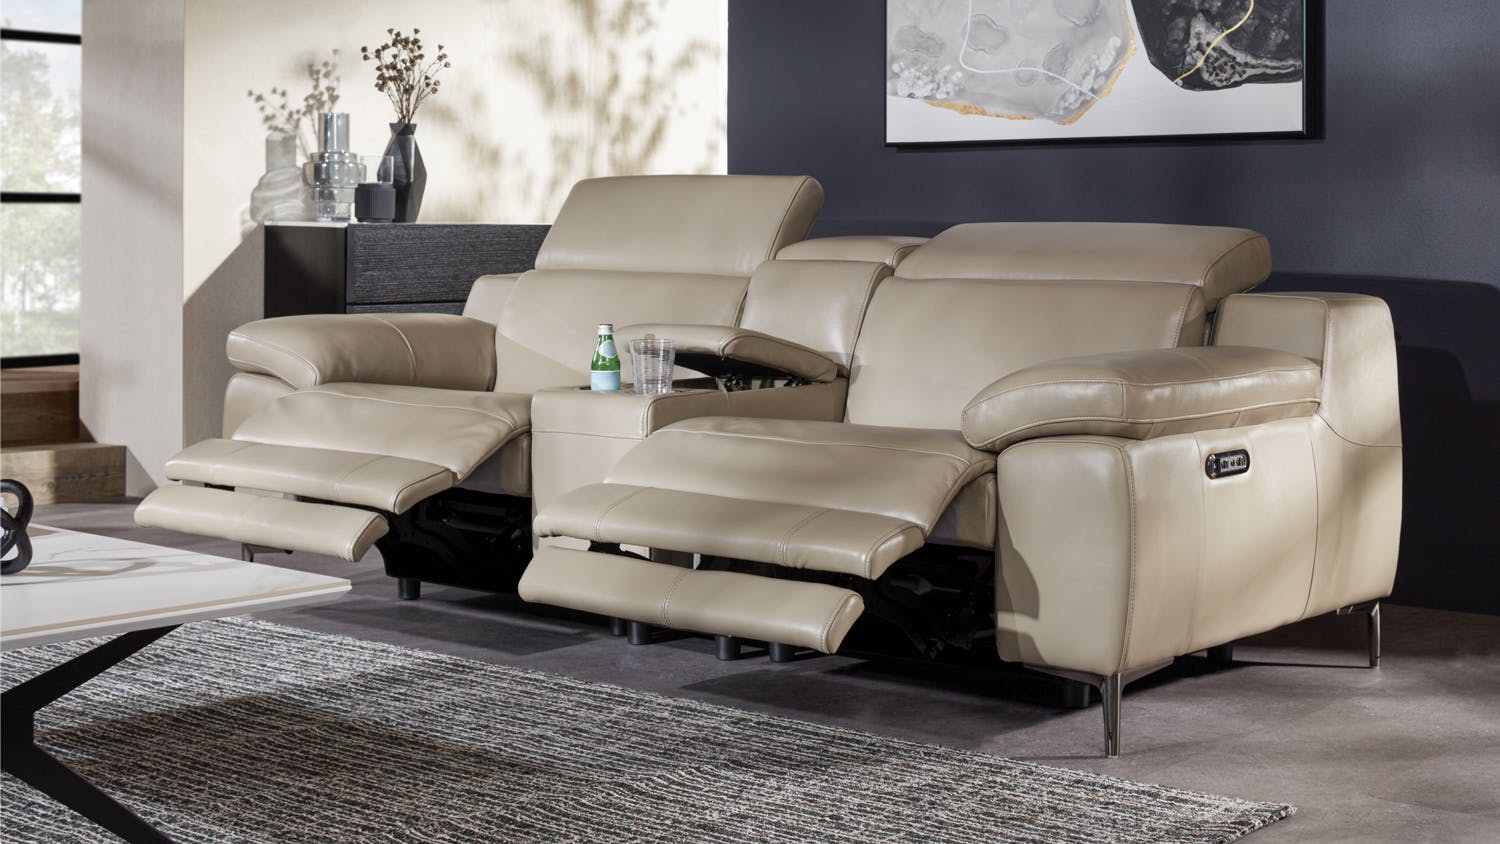 Florence 2 Seater Leather Electric Recliner Sofa